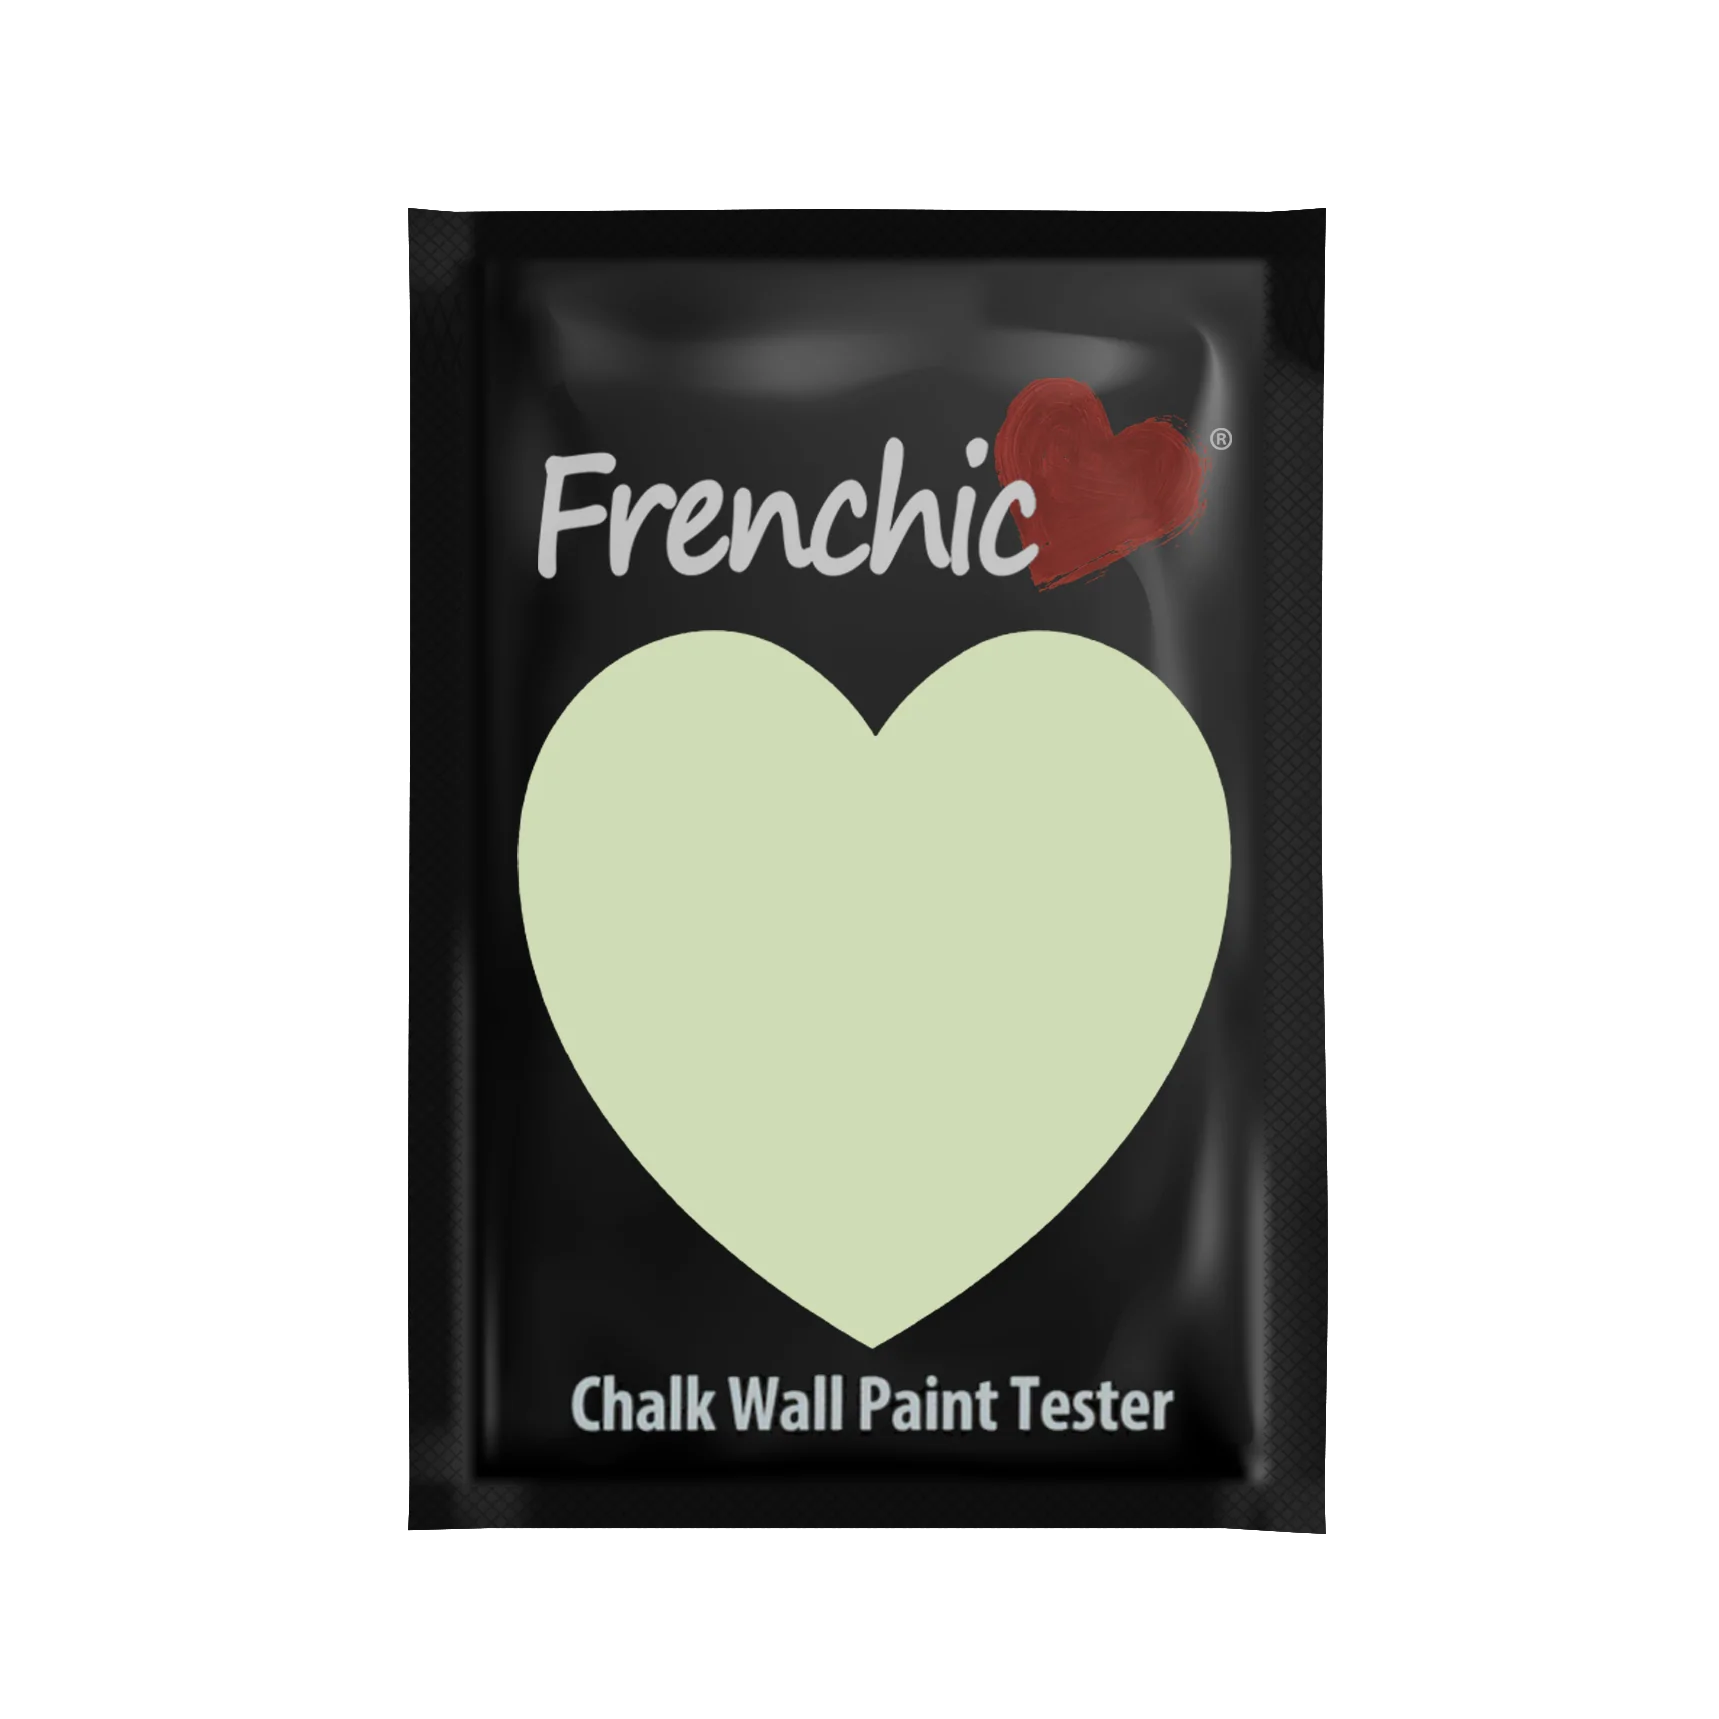 Frenchic Paint | Eye Candy Wall Paint Sample by Weirs of Baggot Street